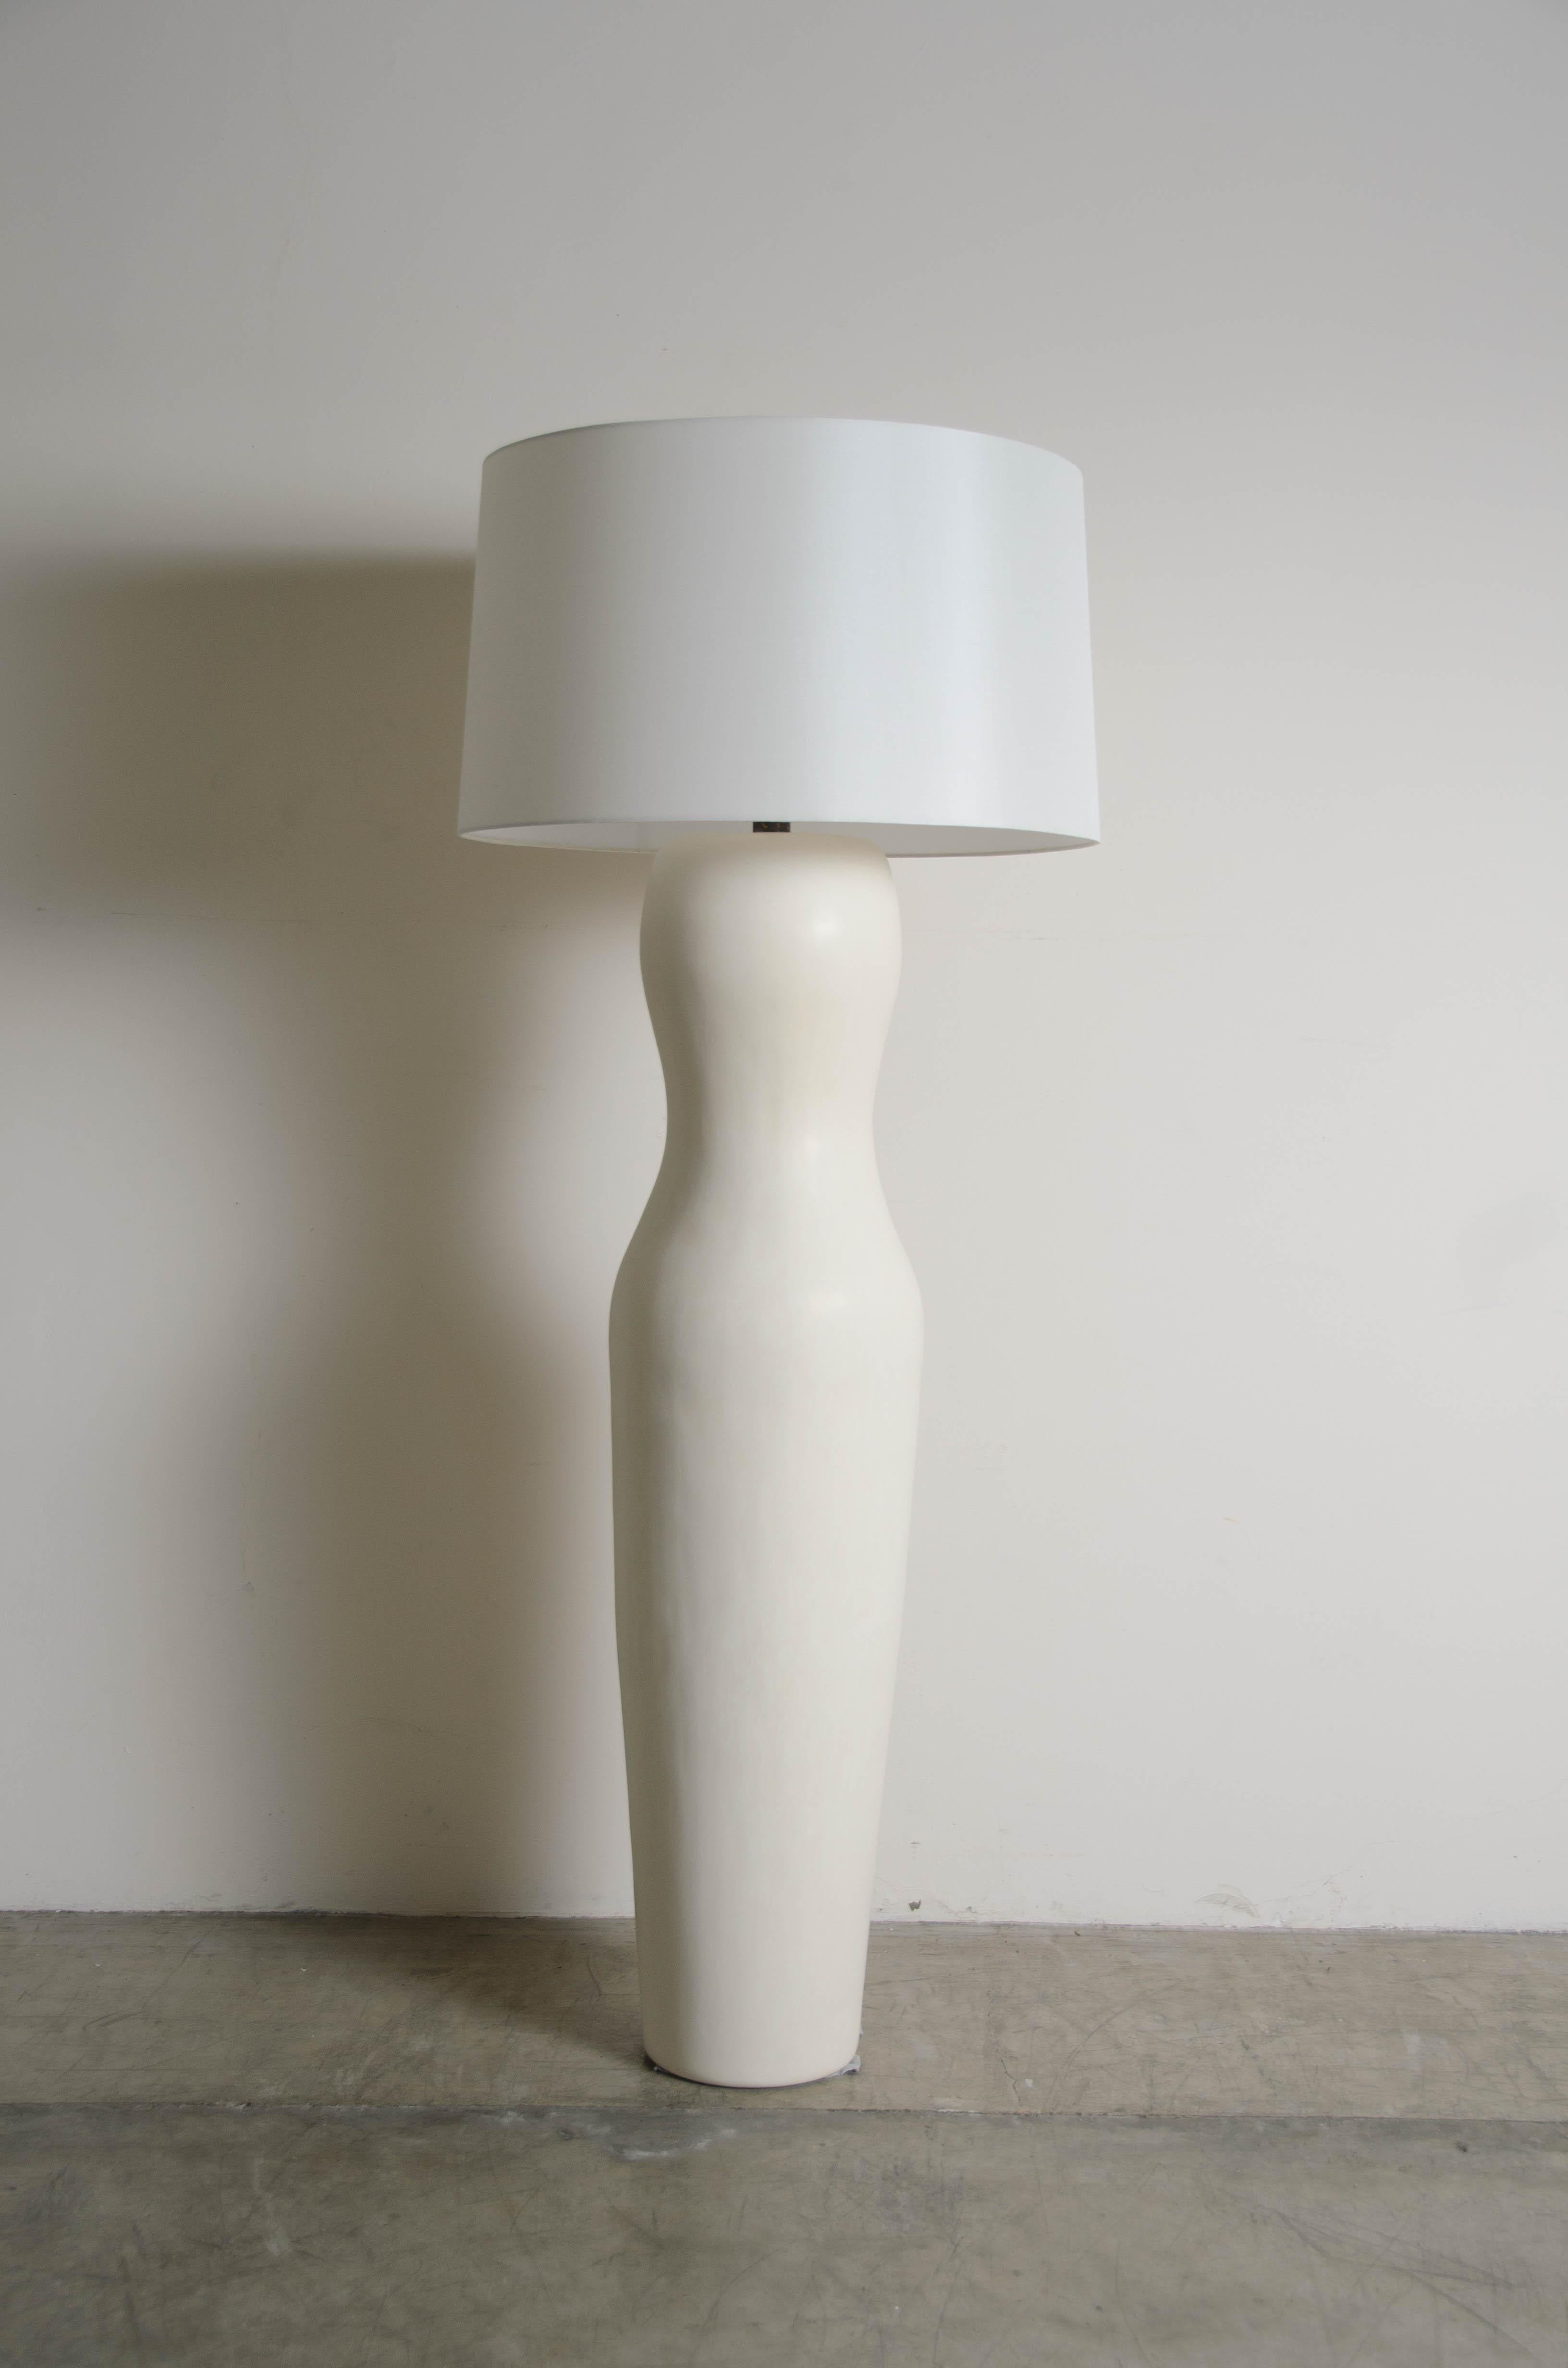 Minimalist Contemporary Besame Floor Lamp in Cream Lacquer by Robert Kuo